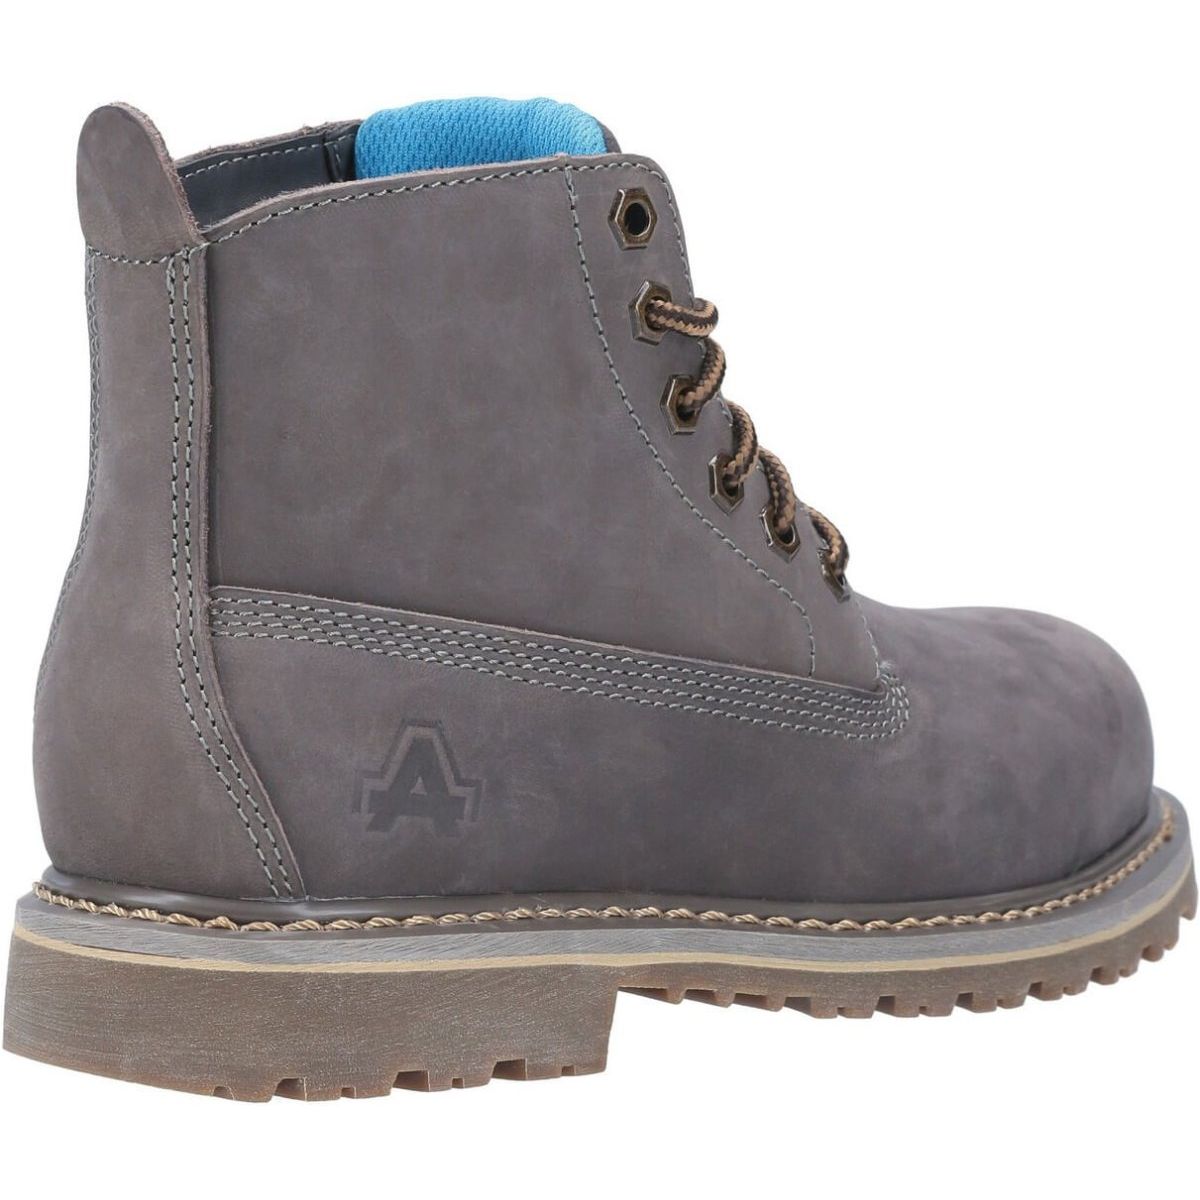 Amblers As105 Mimi Safety Boots Womens - workweargurus.com